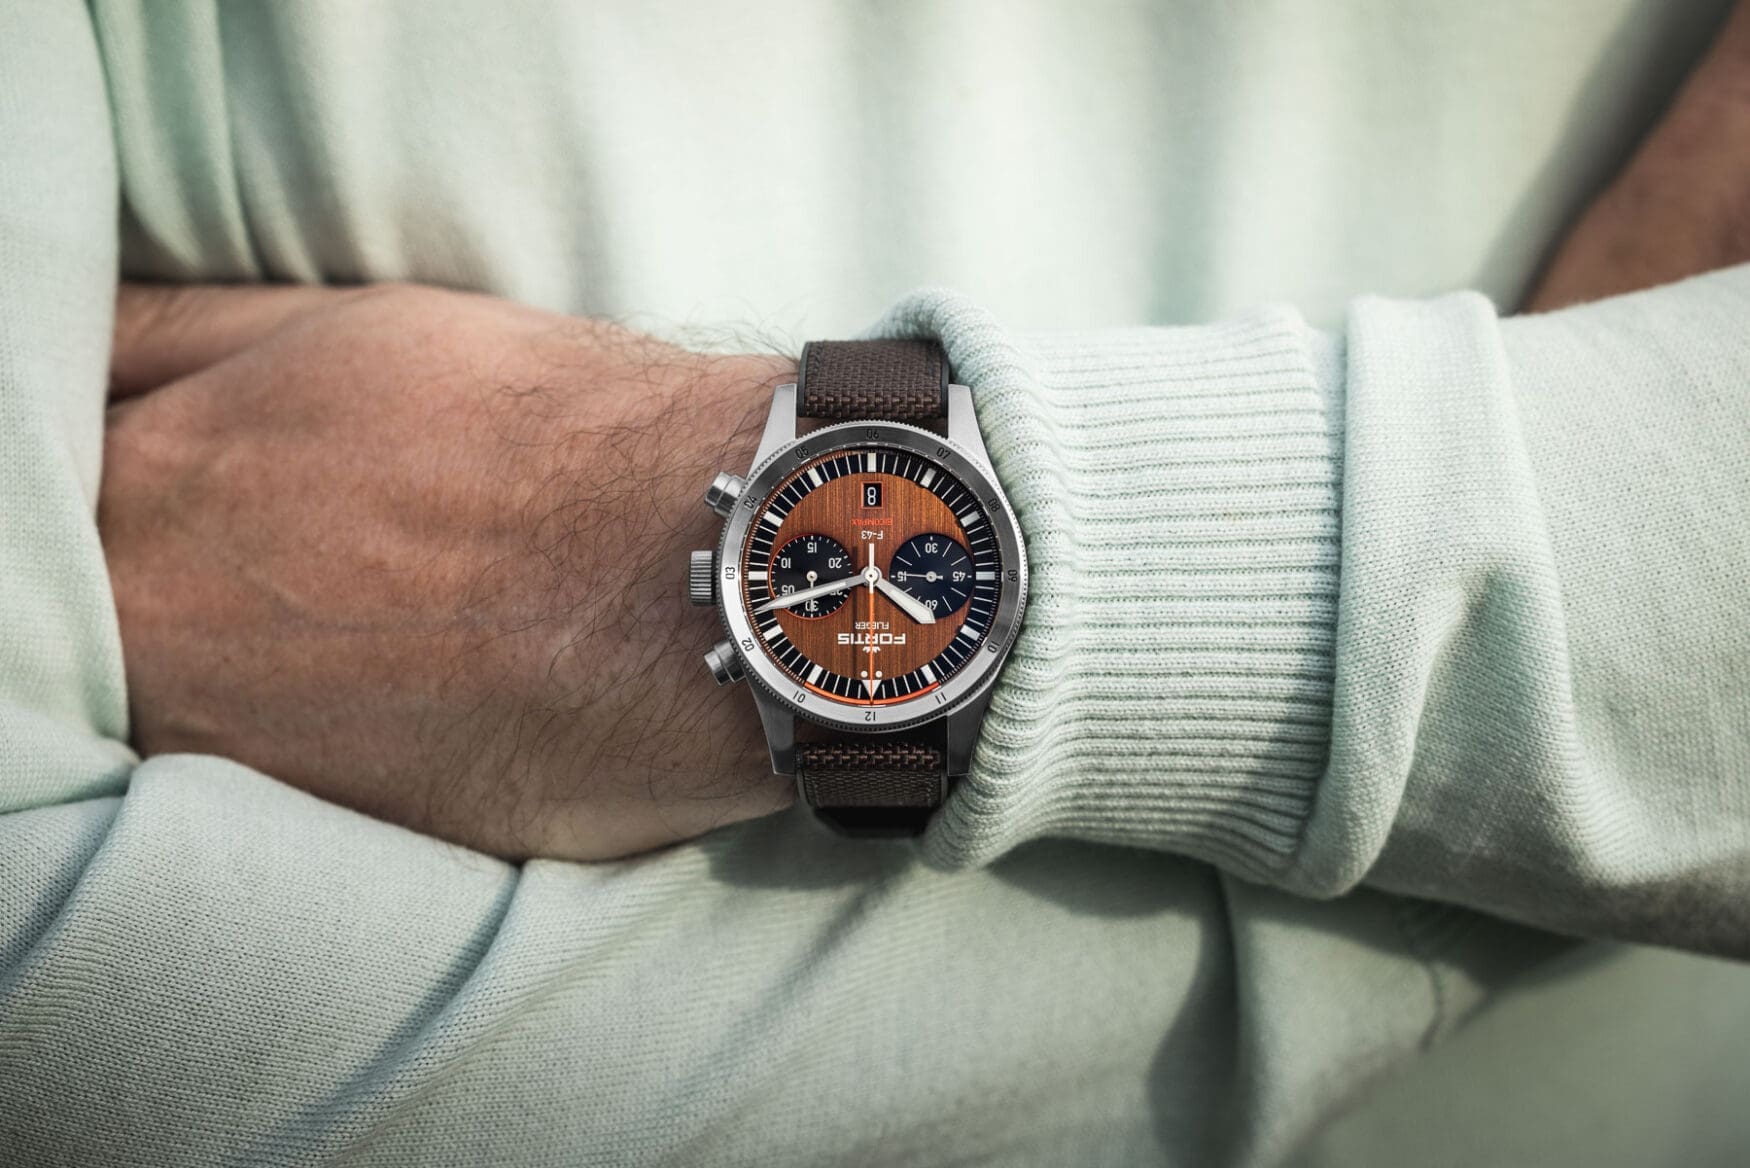 The Fortis Flieger F-43 Bicompax Fratello Capsule Edition is the publication’s latest collaboration